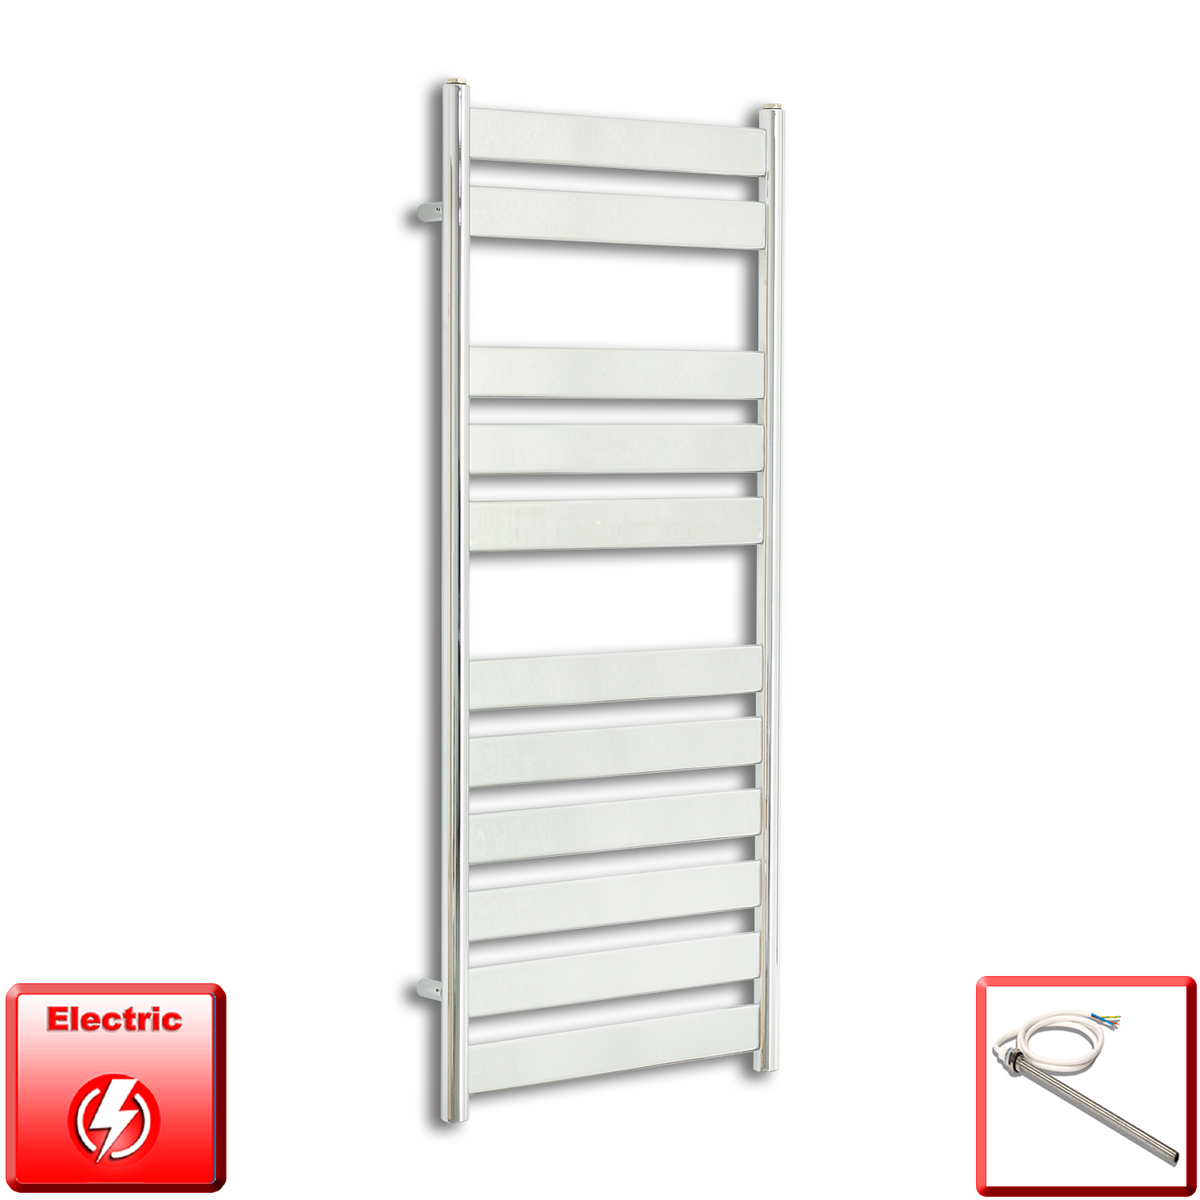 500mm Wide 1200mm High Pre-Filled Chrome Electric Towel Rail Radiator With Single Heat Element